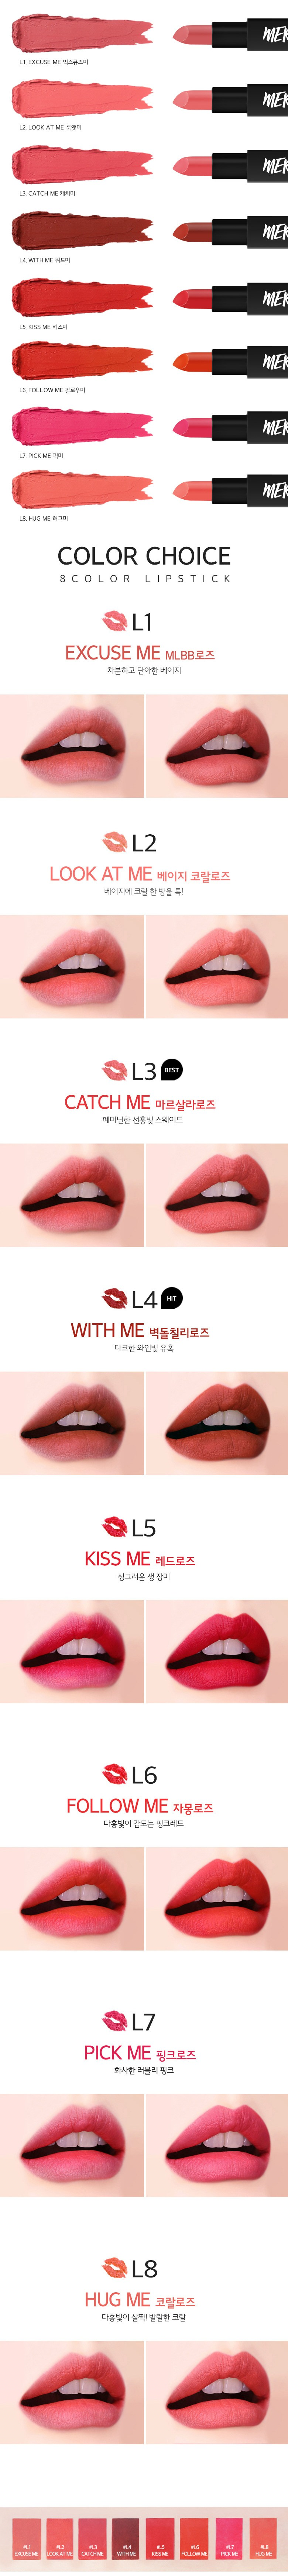 MERZY The First Lipstick Excuse Me L1 3.5g 1